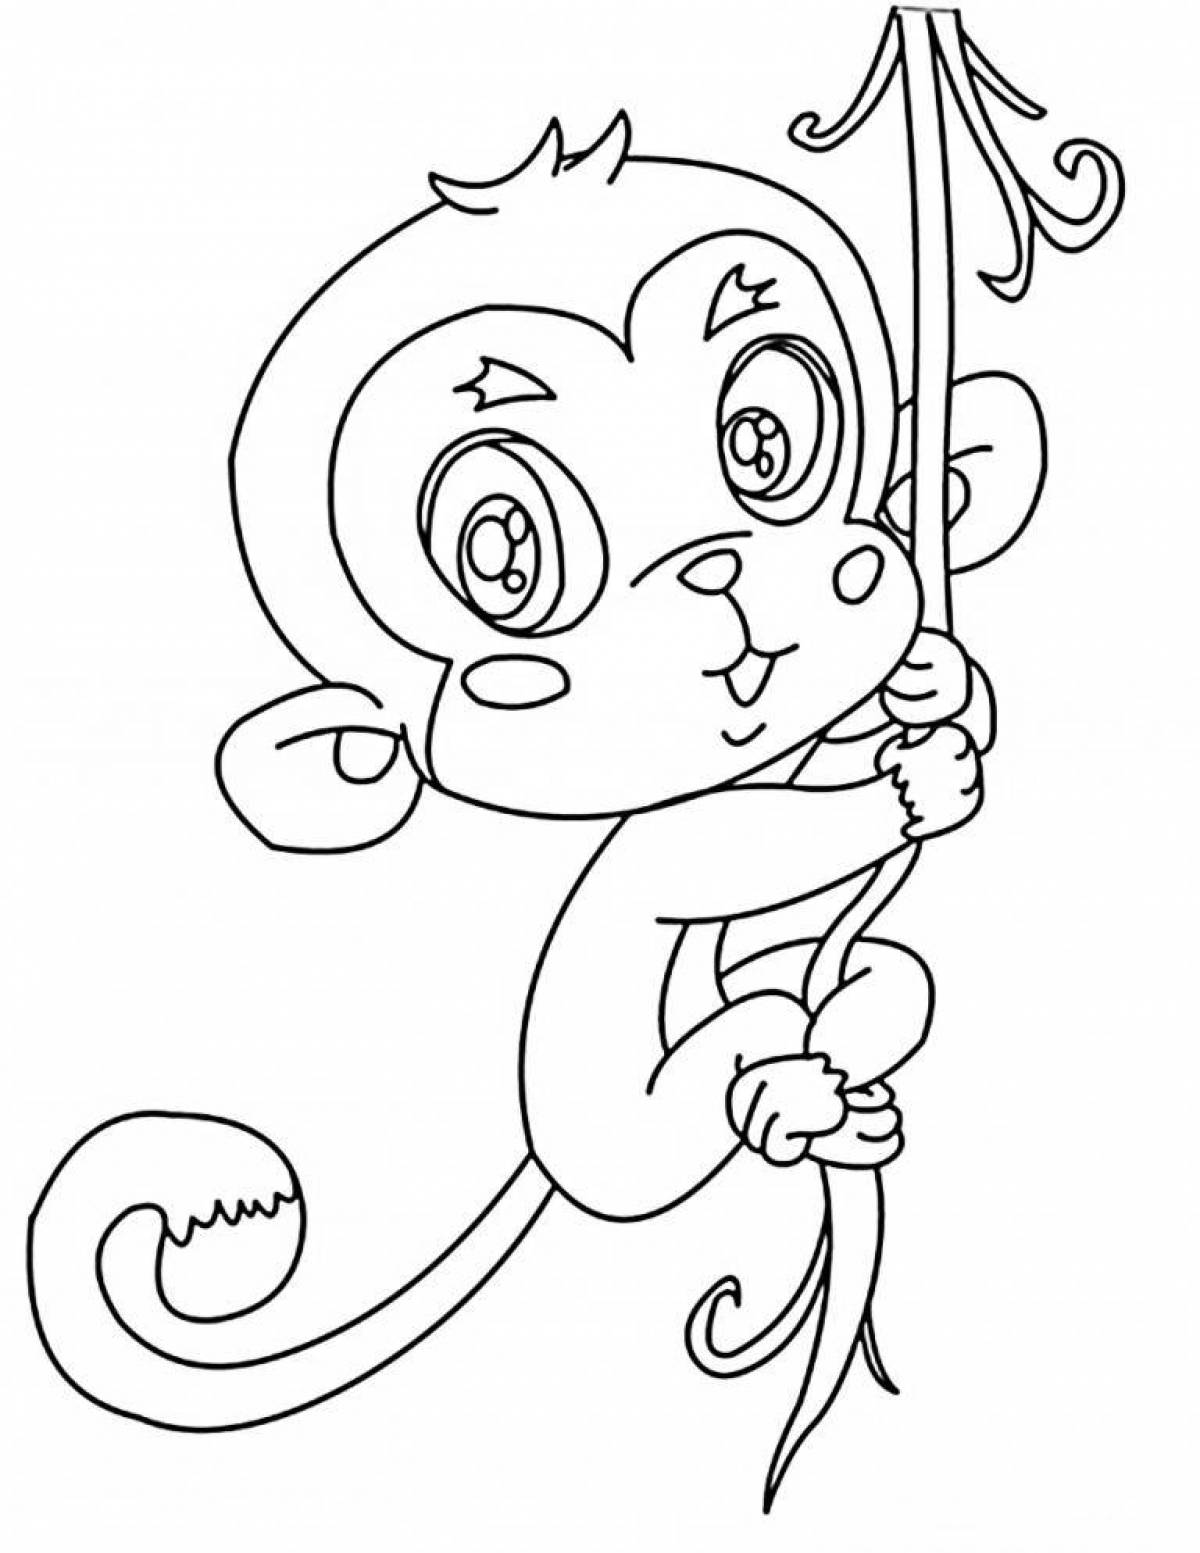 Rampant monkey coloring book for kids